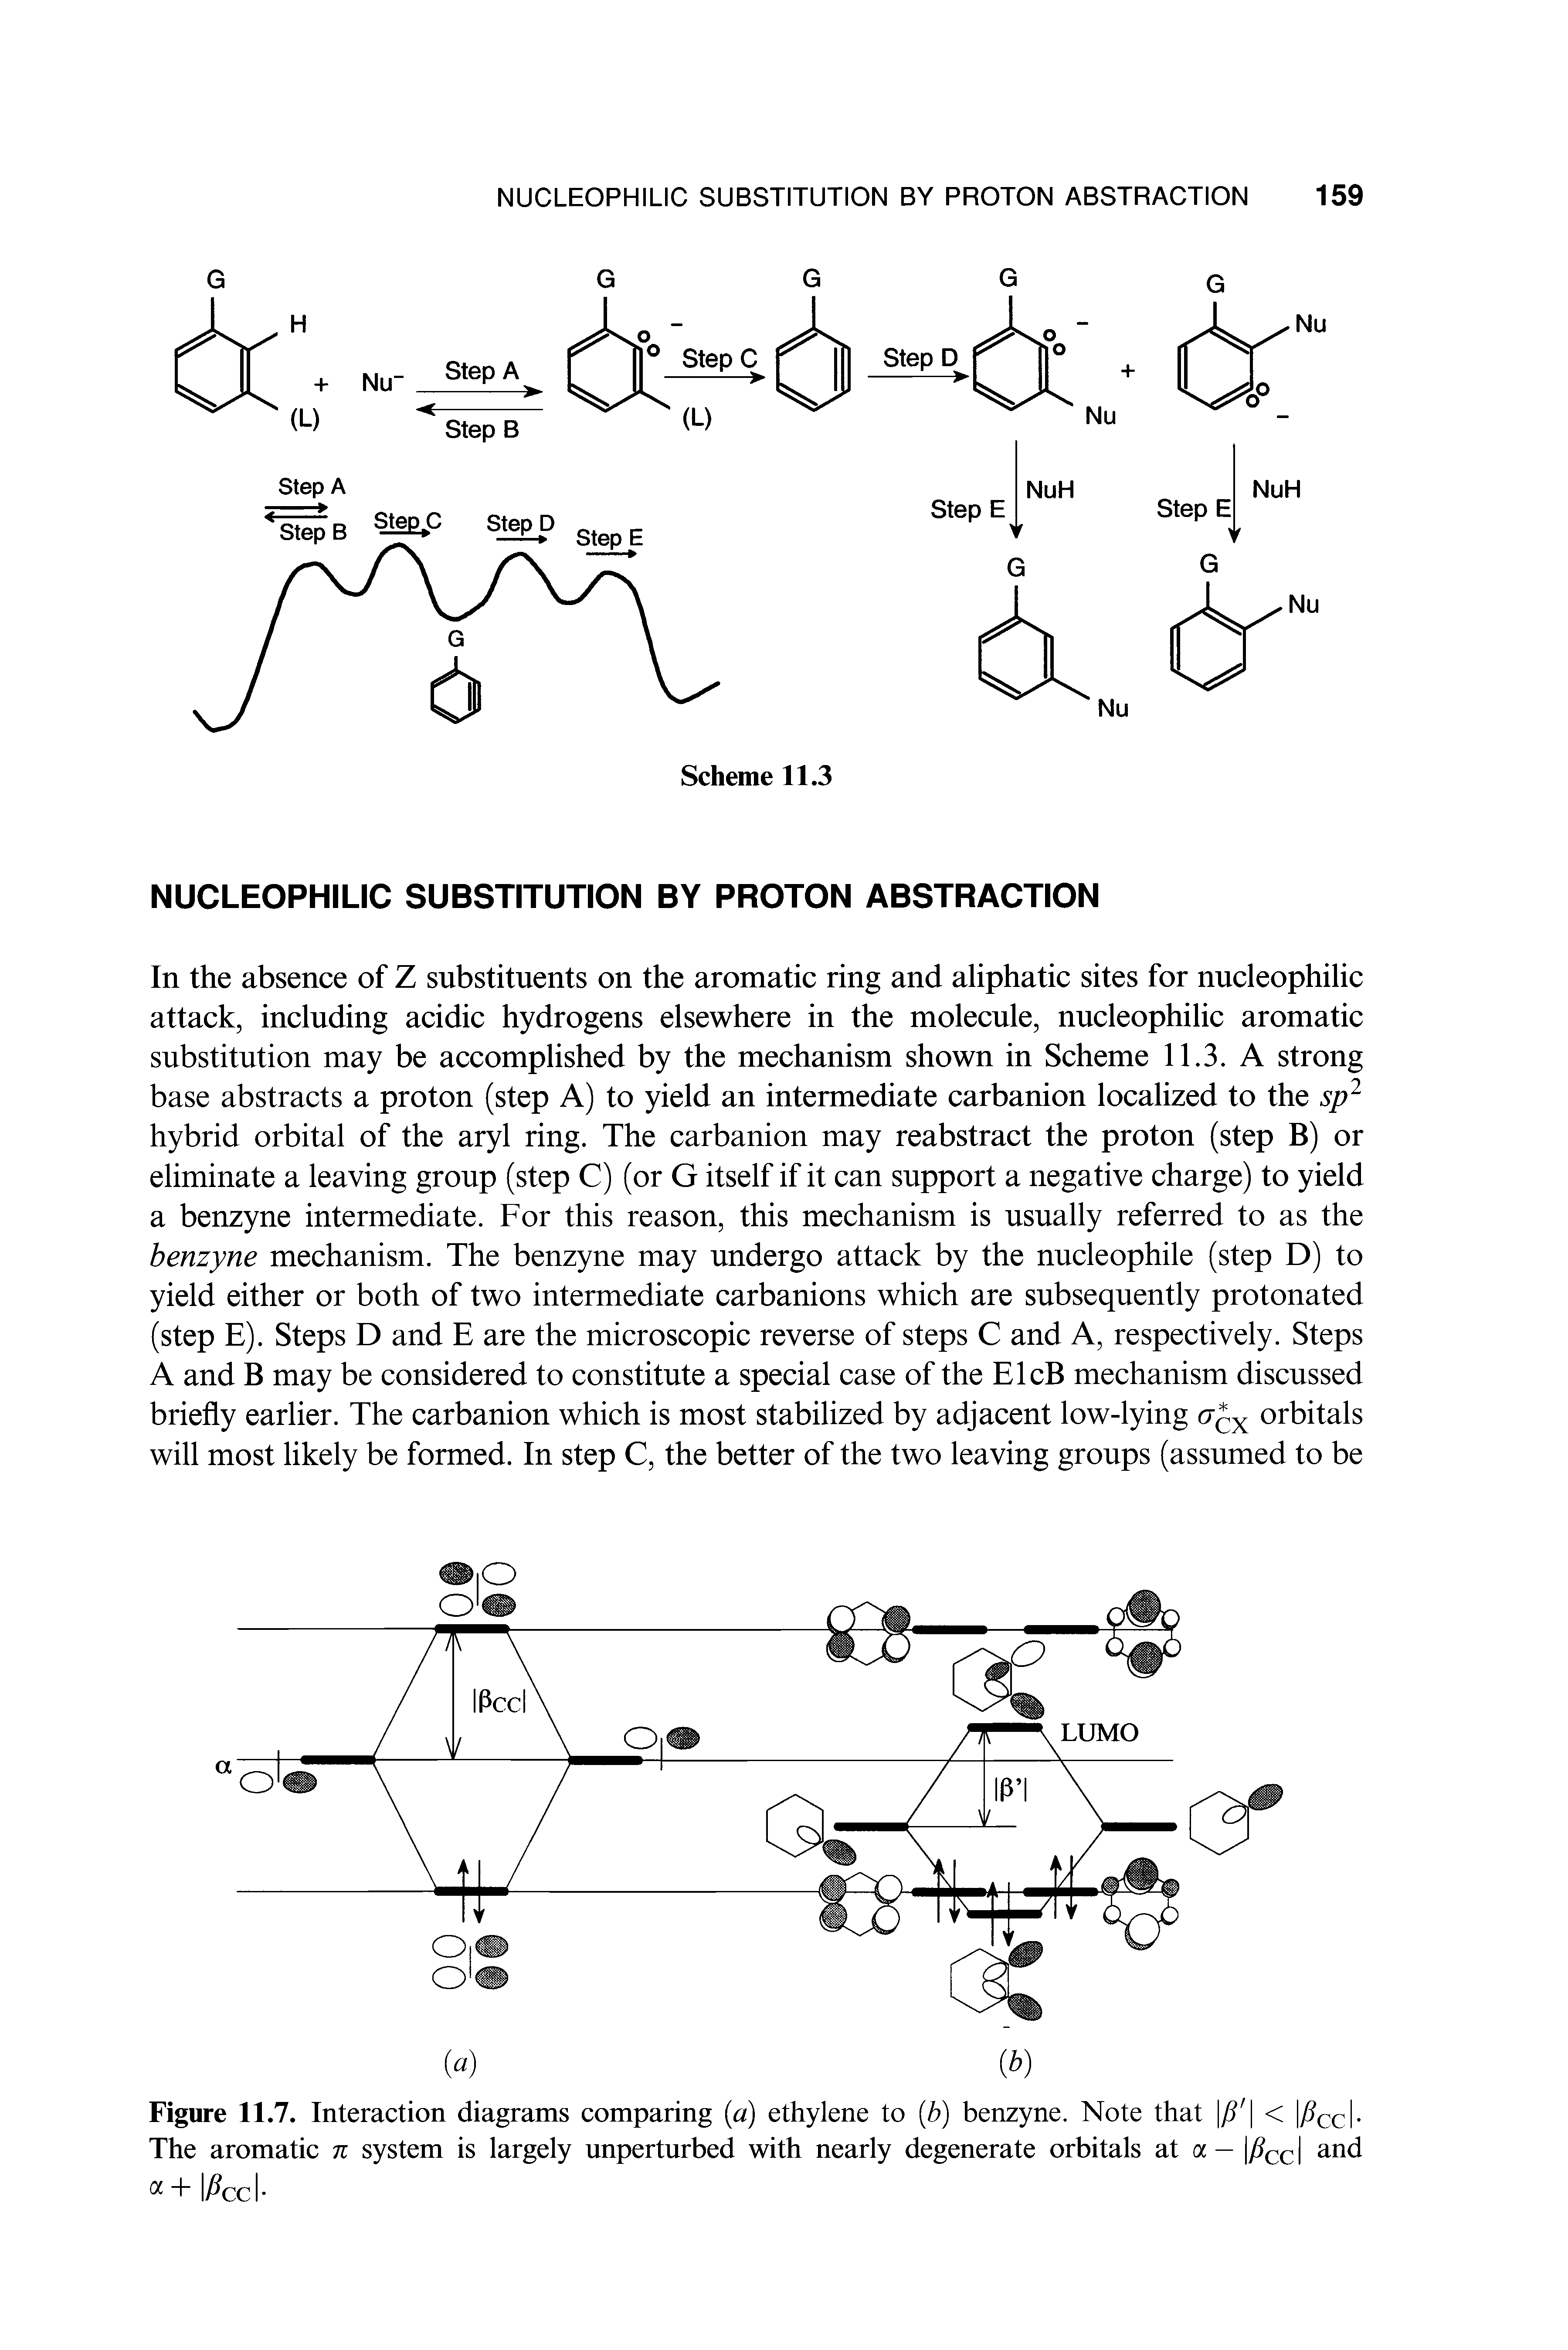 Figure 11.7. Interaction diagrams comparing (a) ethylene to (b) benzyne. Note that (i I < lAxl-The aromatic n system is largely unperturbed with nearly degenerate orbitals at a — /icc and a + Pcc -...